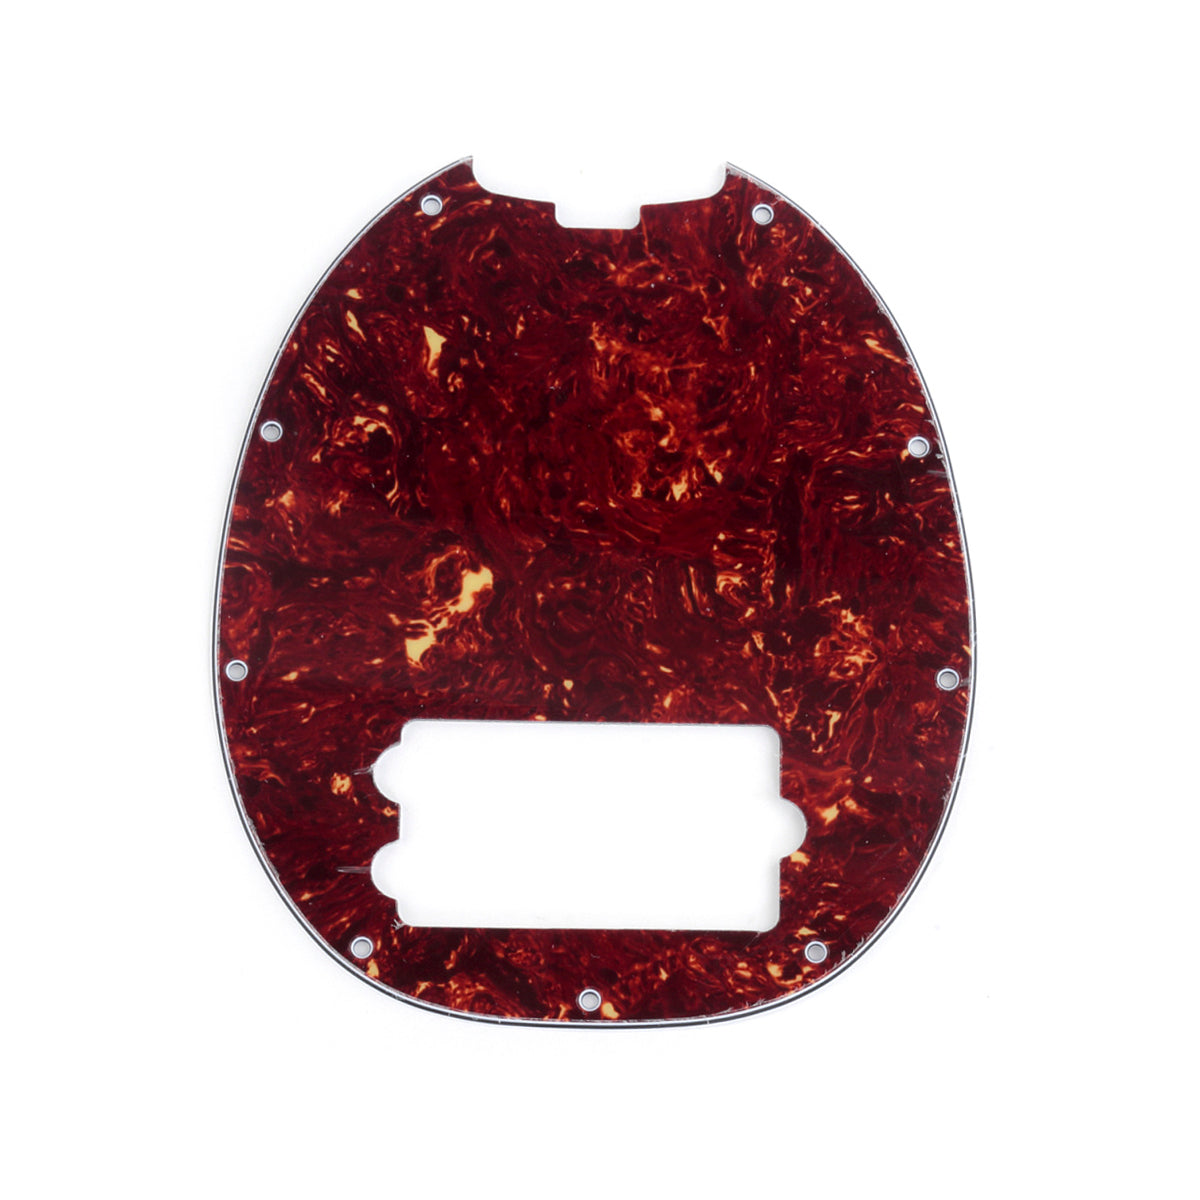 Musiclily 9 Hole Bass Pickguard for Musicman Stingray Bass,4Ply Vintage Tortoise